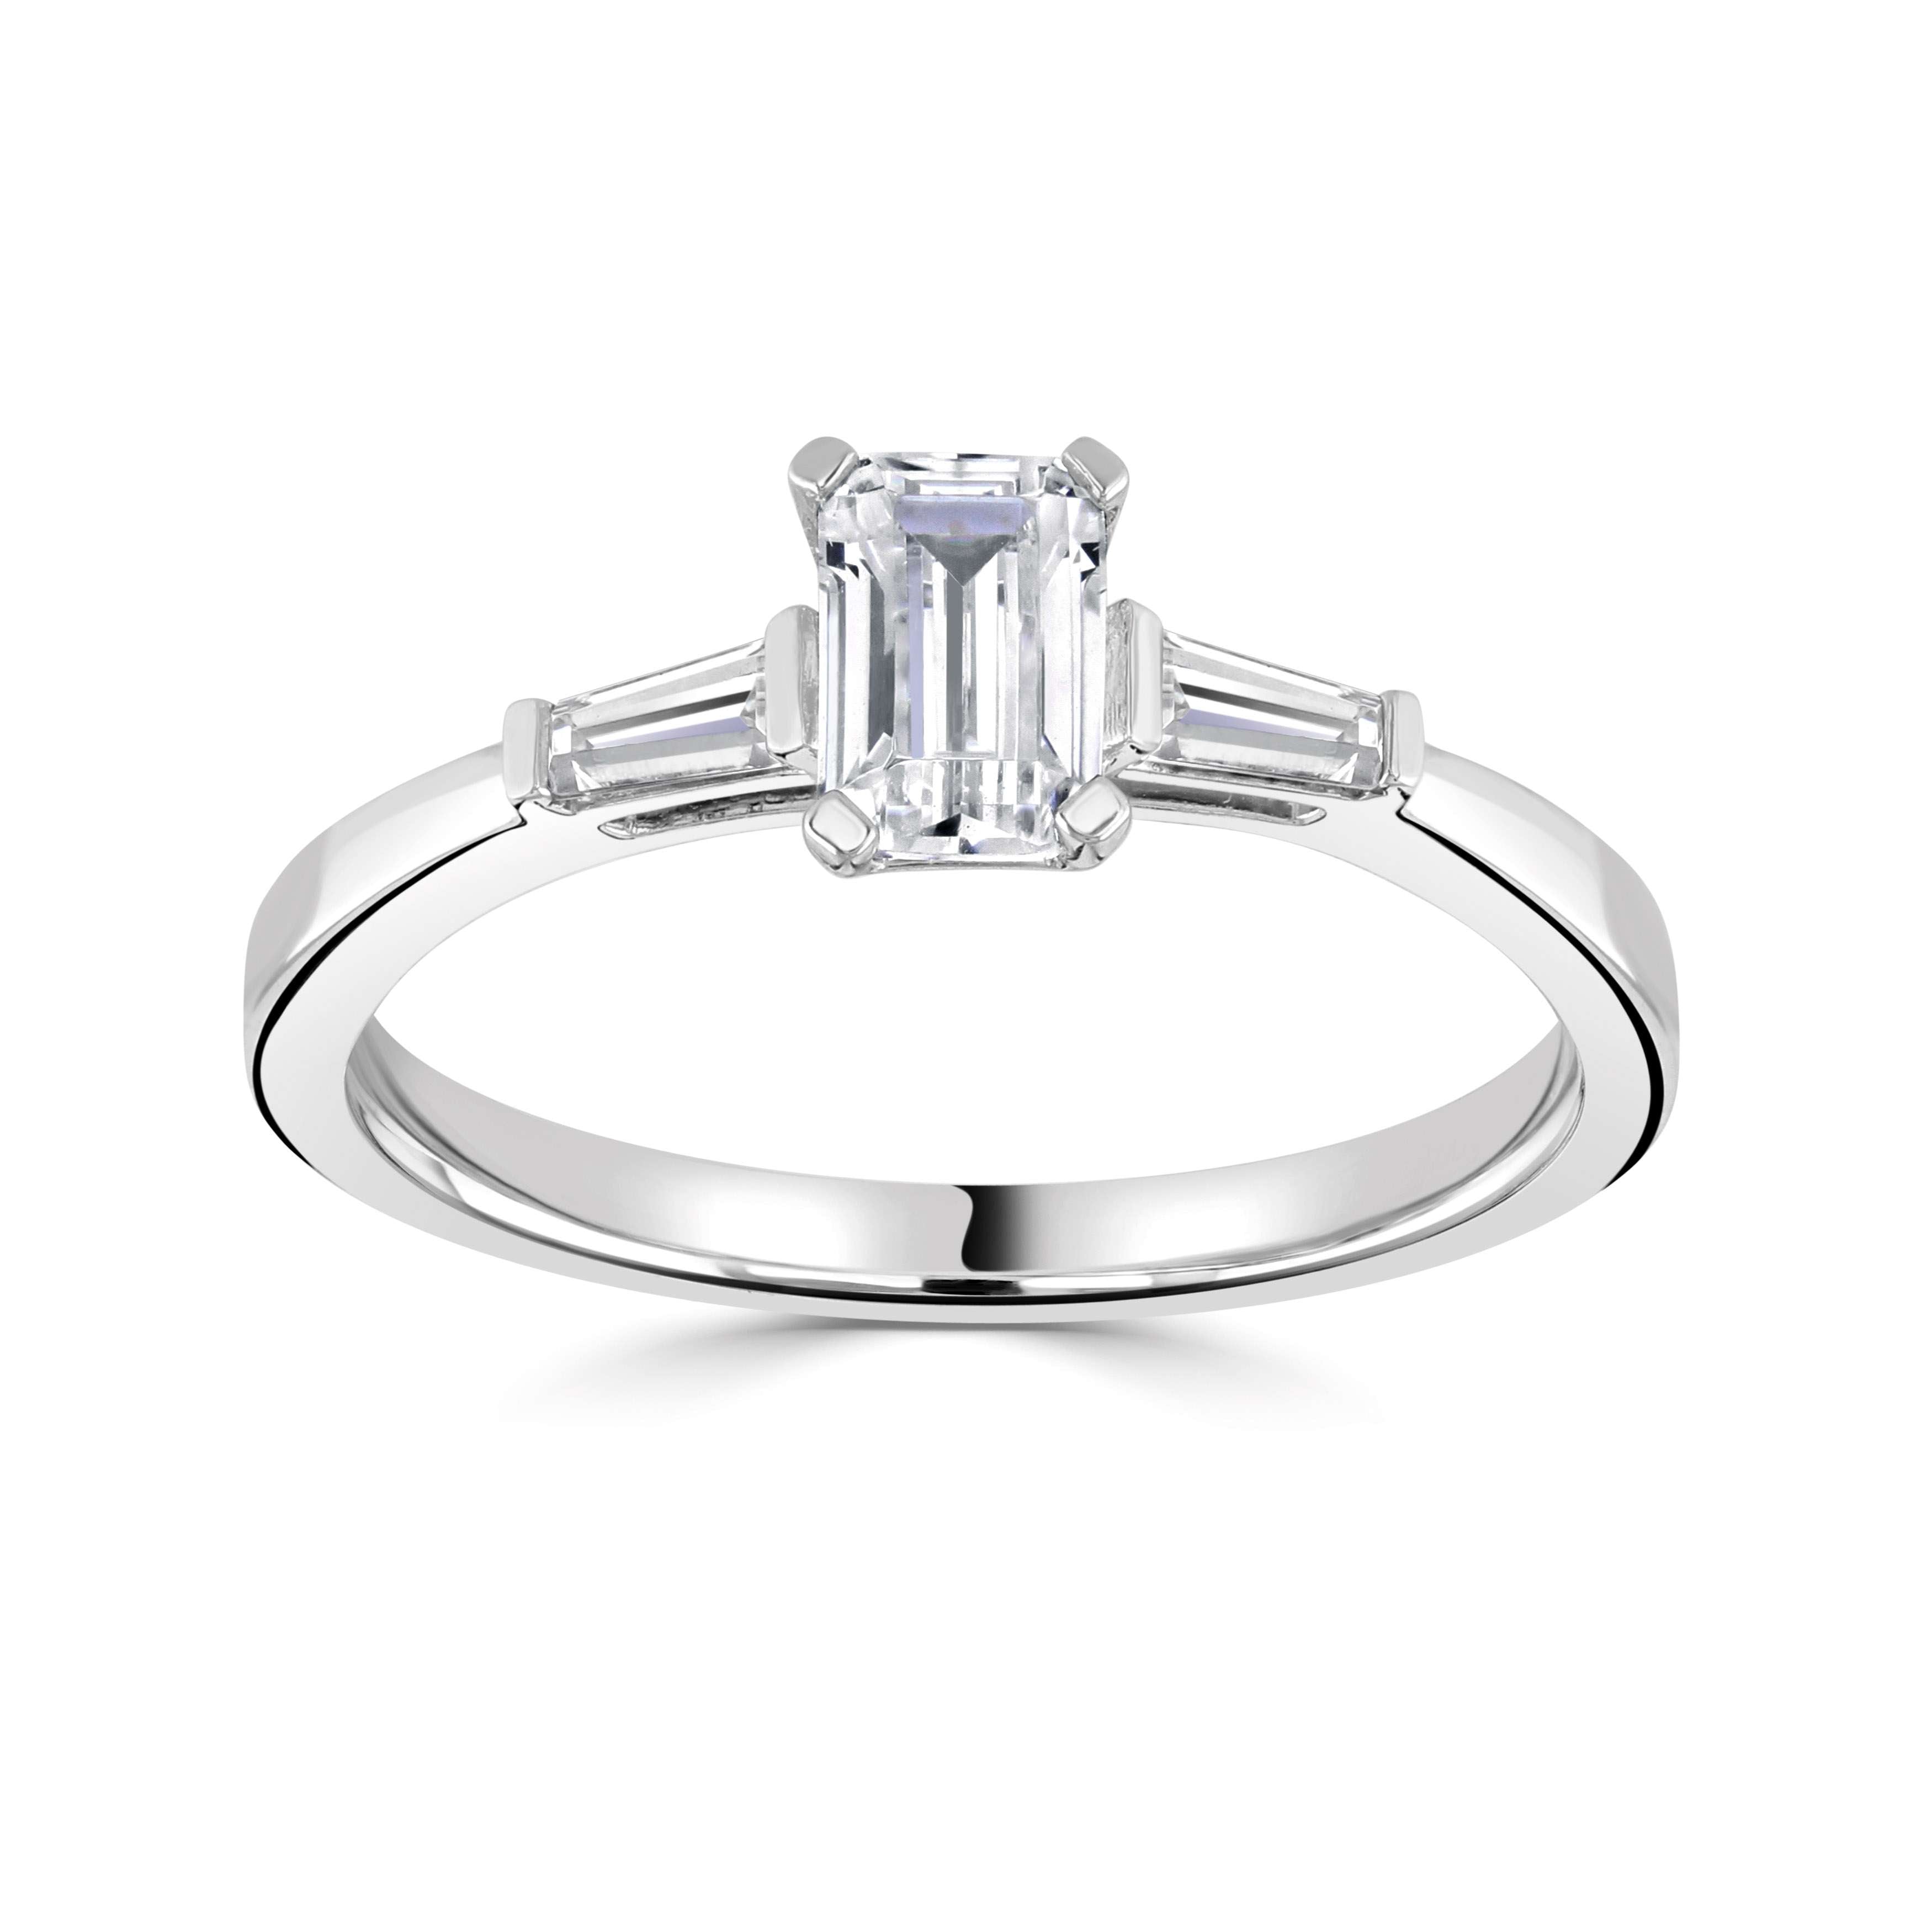 Millie *Select Emerald Cut Diamond 0.40ct or above